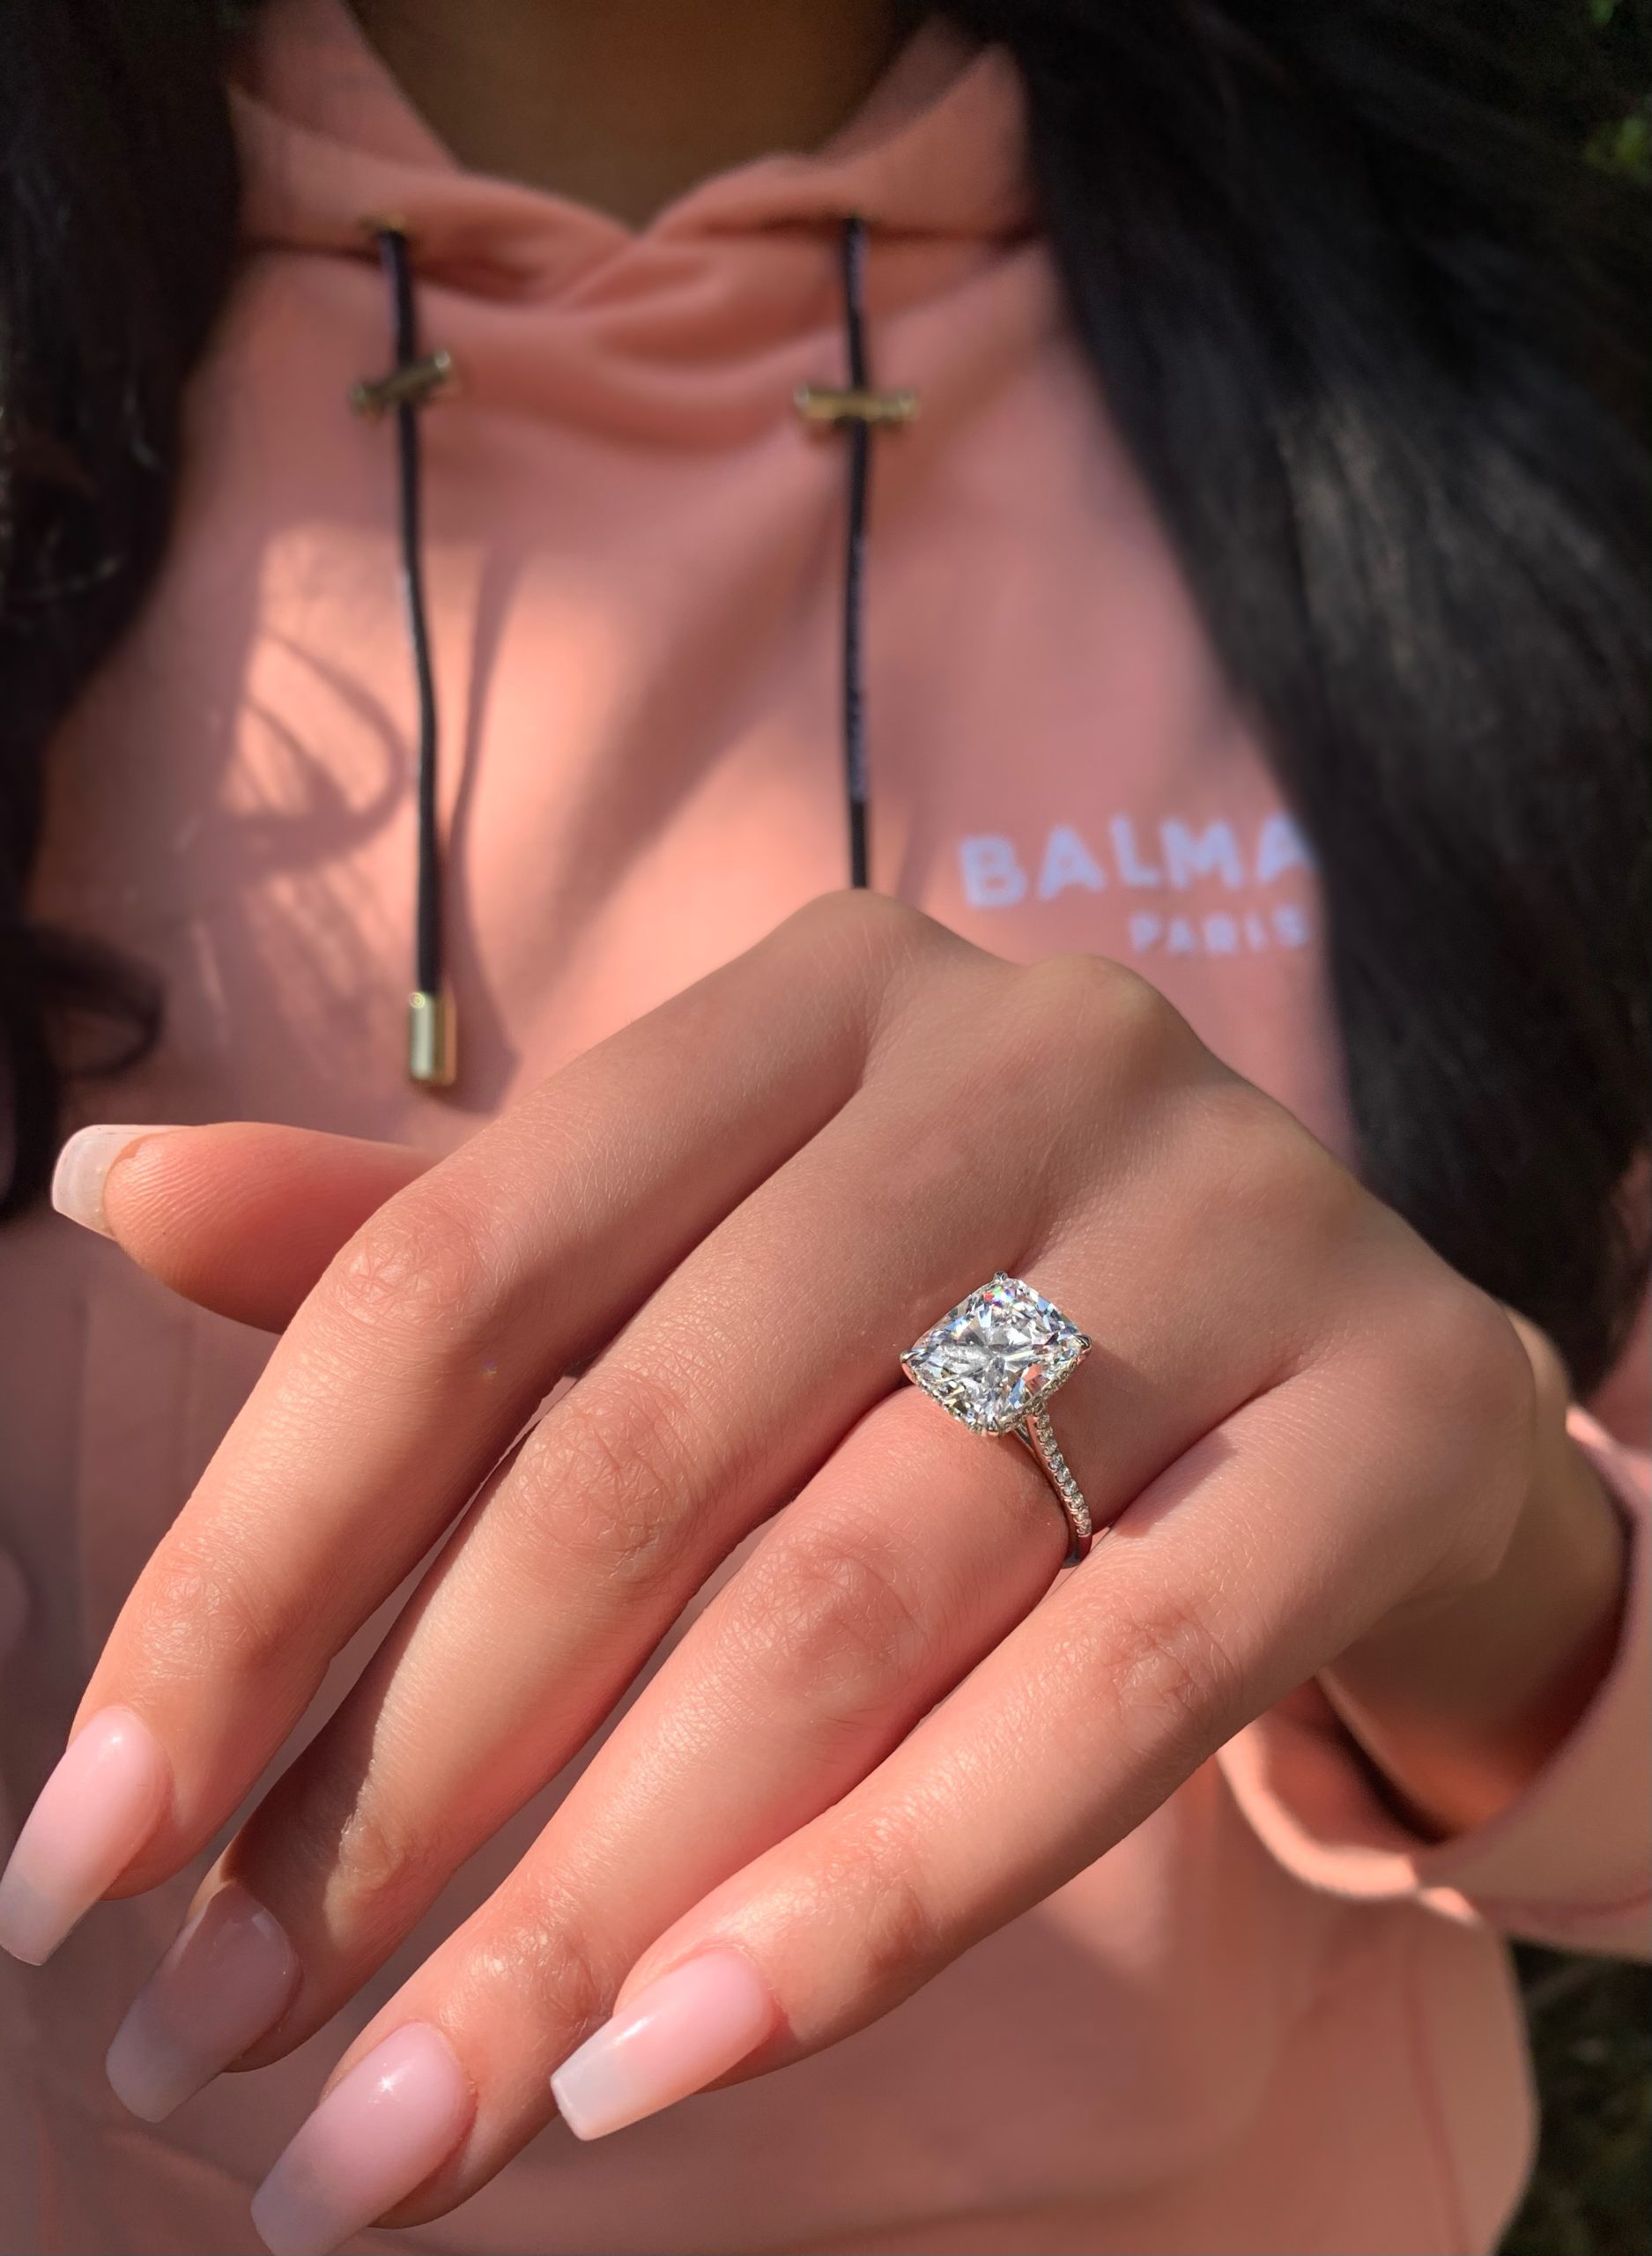 6 Carat Round Cut Diamond with Petite Engagement Ring - YouTube